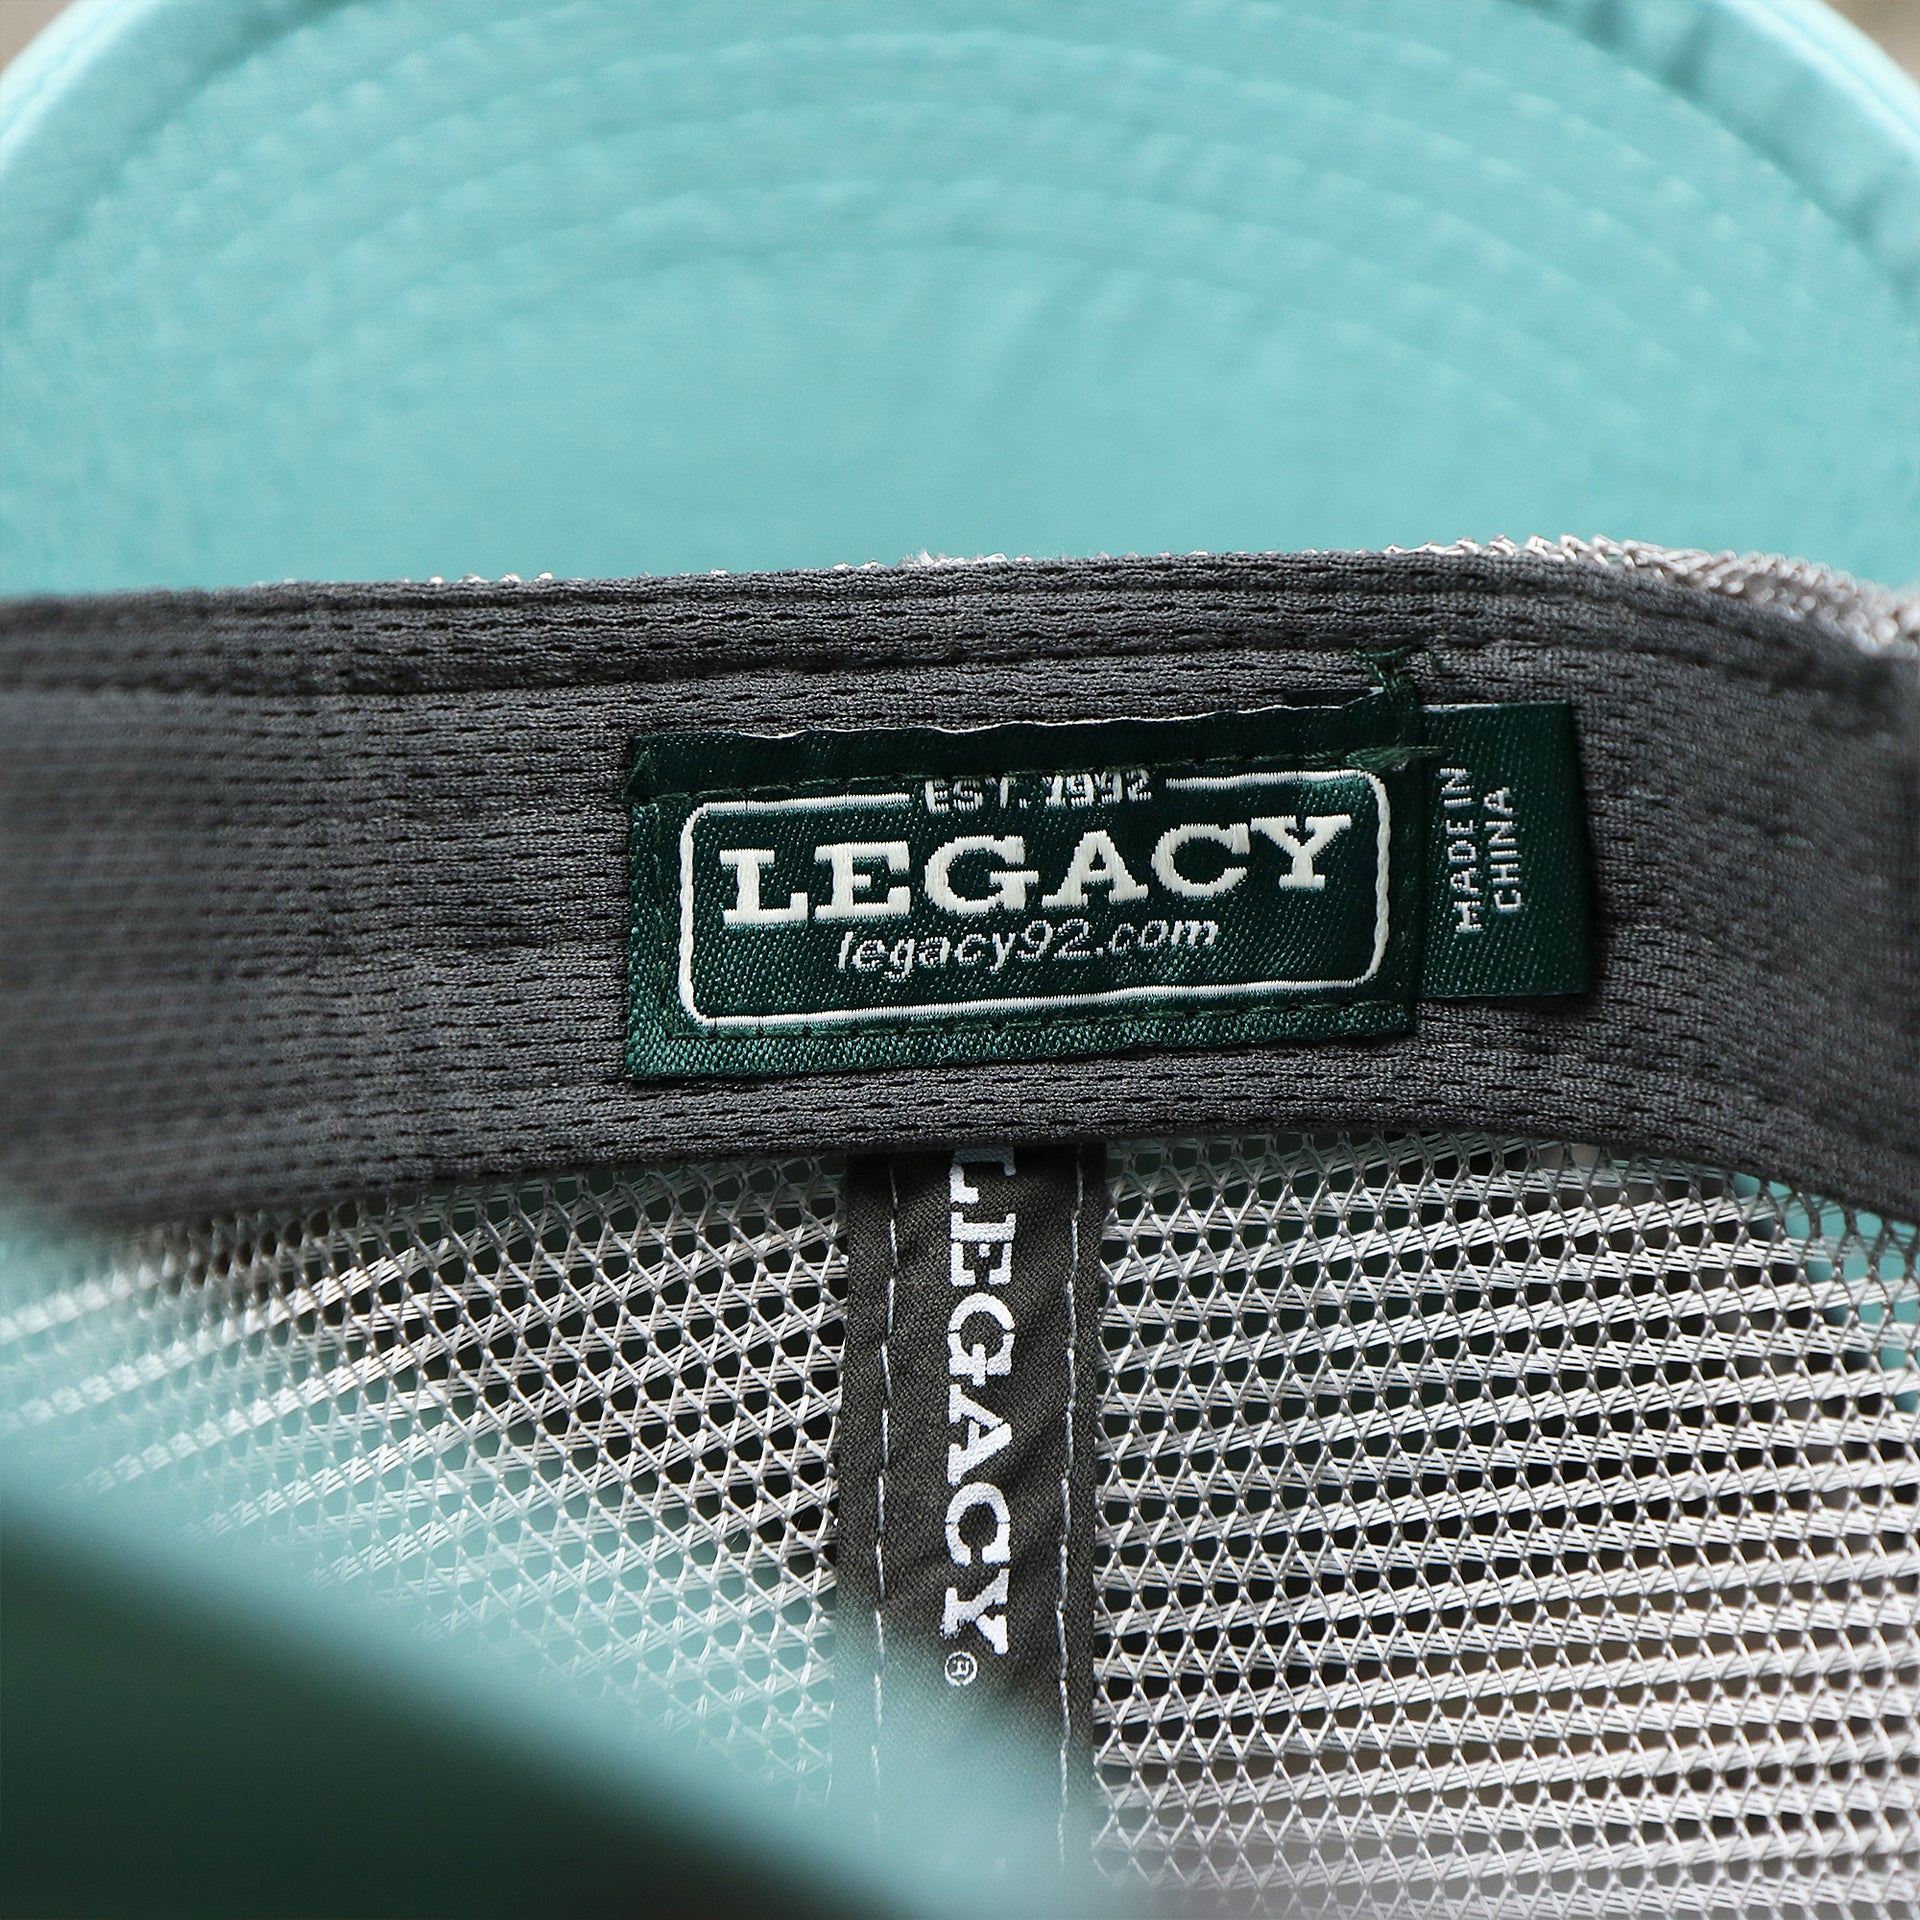 The Legacy Tag on the New Jersey Ocean City Sunset Mesh Back Trucker Hat | Tahiti Blue And Grey Mesh Trucker Hat